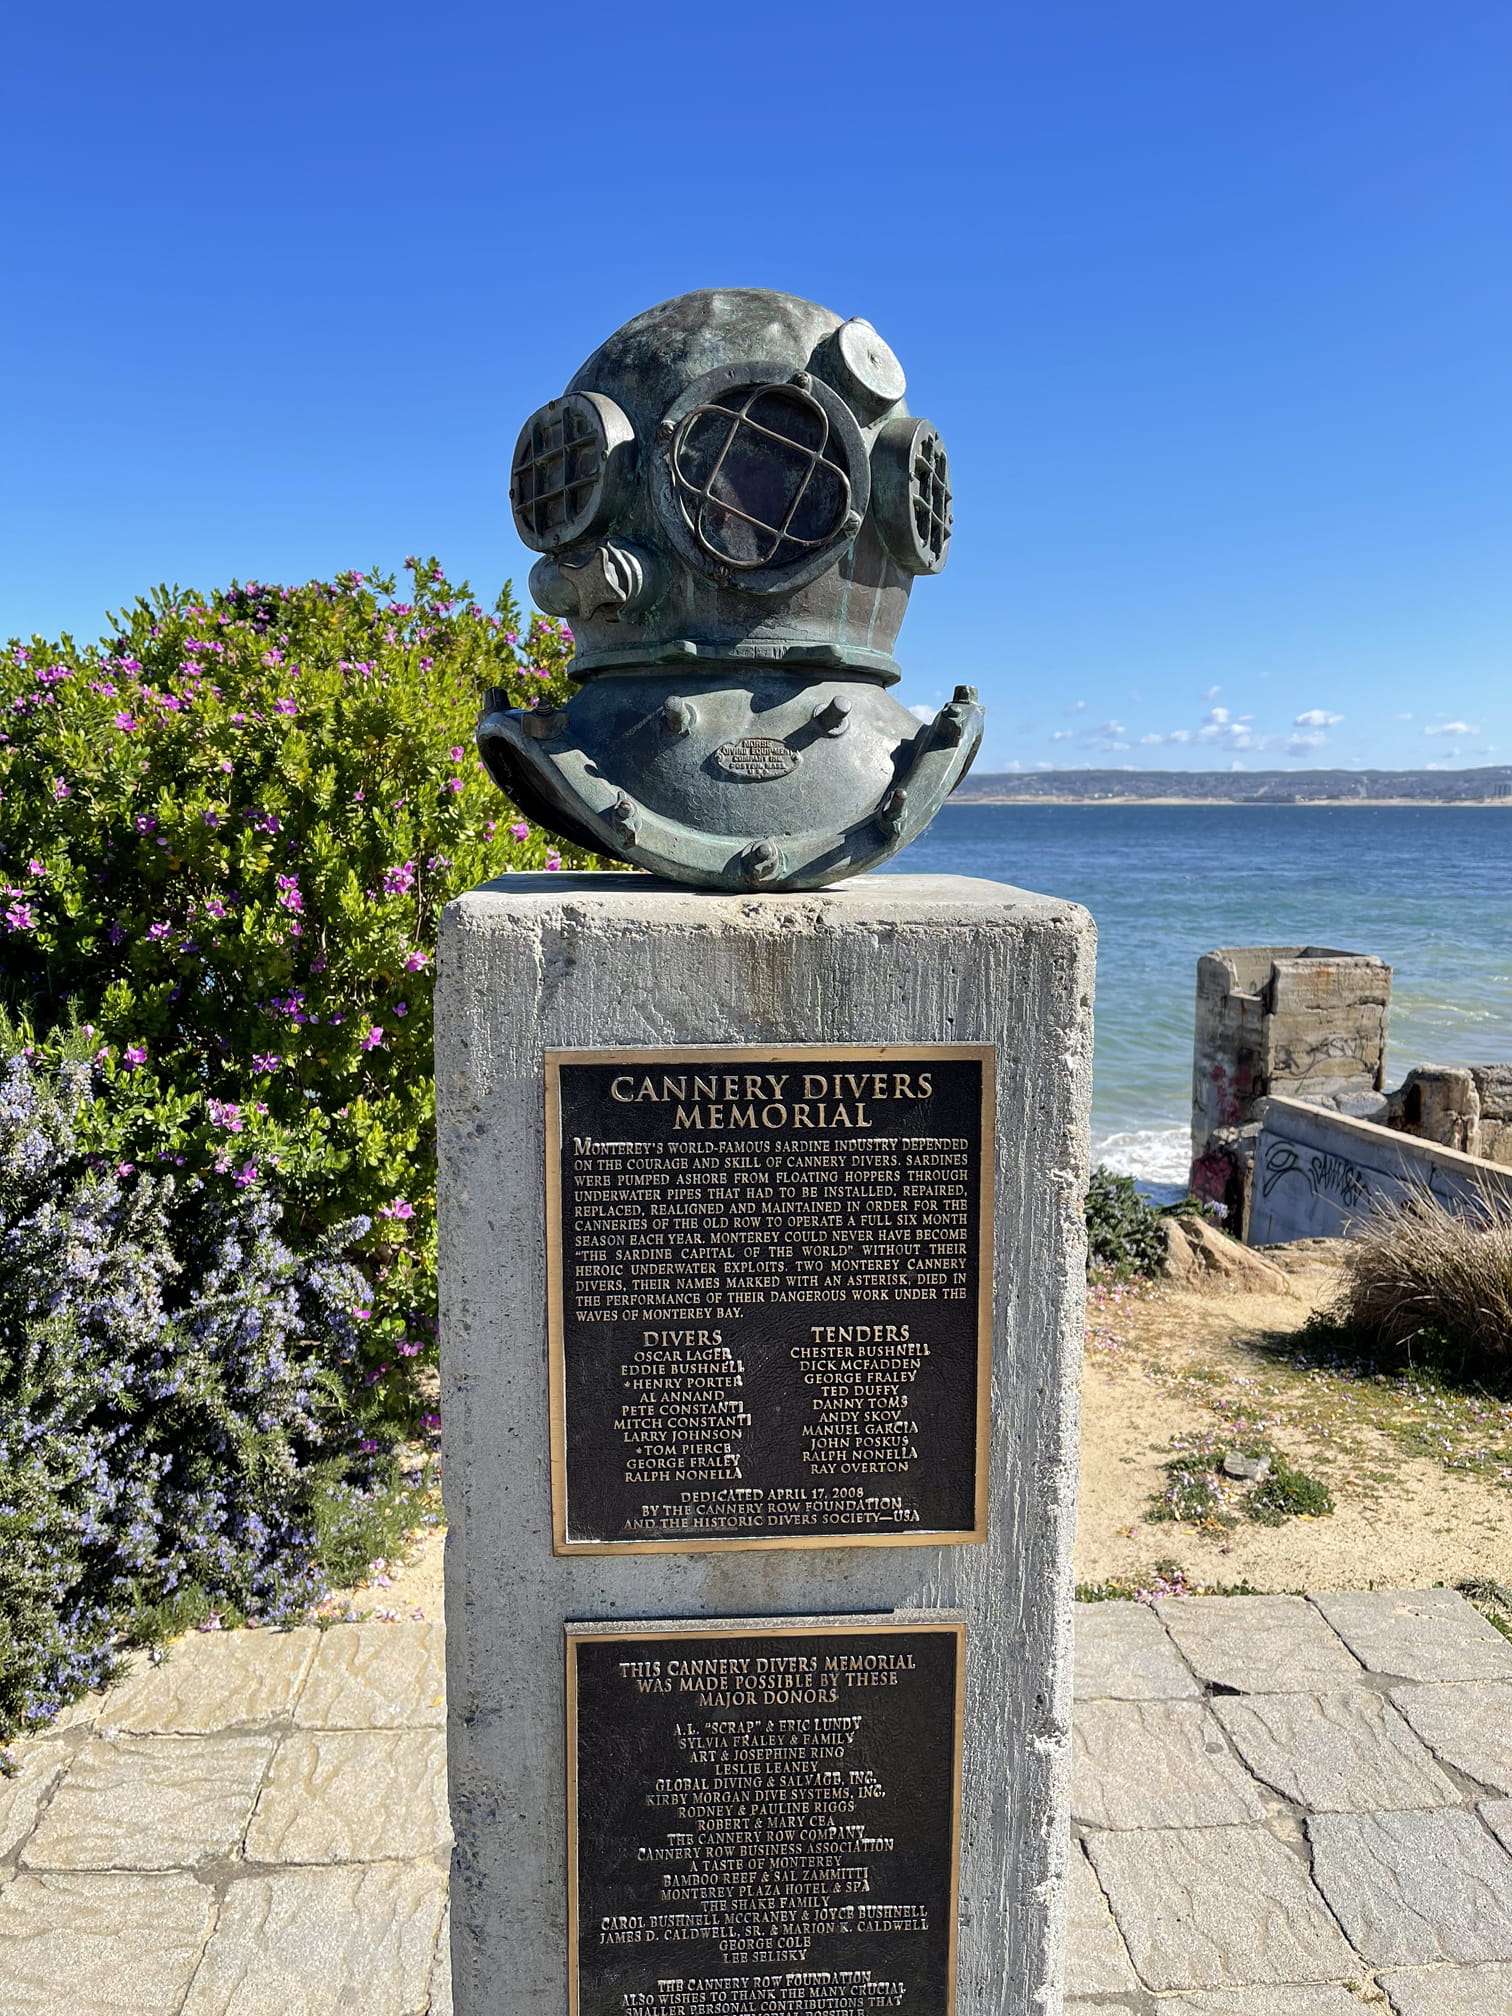 Cannery divers memorial - monterey